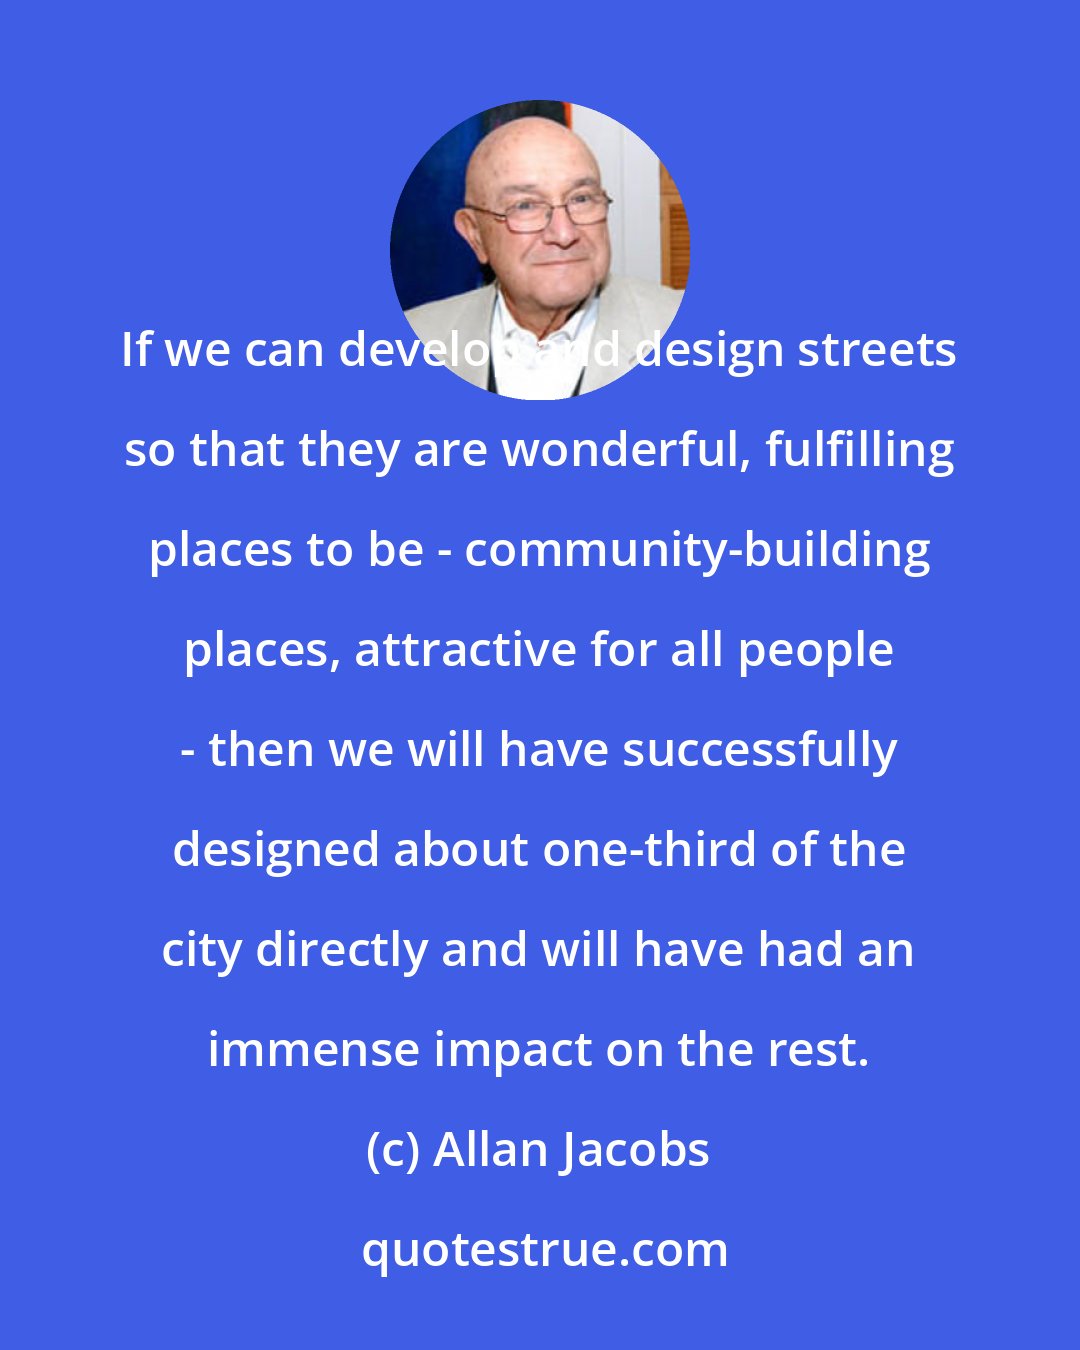 Allan Jacobs: If we can develop and design streets so that they are wonderful, fulfilling places to be - community-building places, attractive for all people - then we will have successfully designed about one-third of the city directly and will have had an immense impact on the rest.